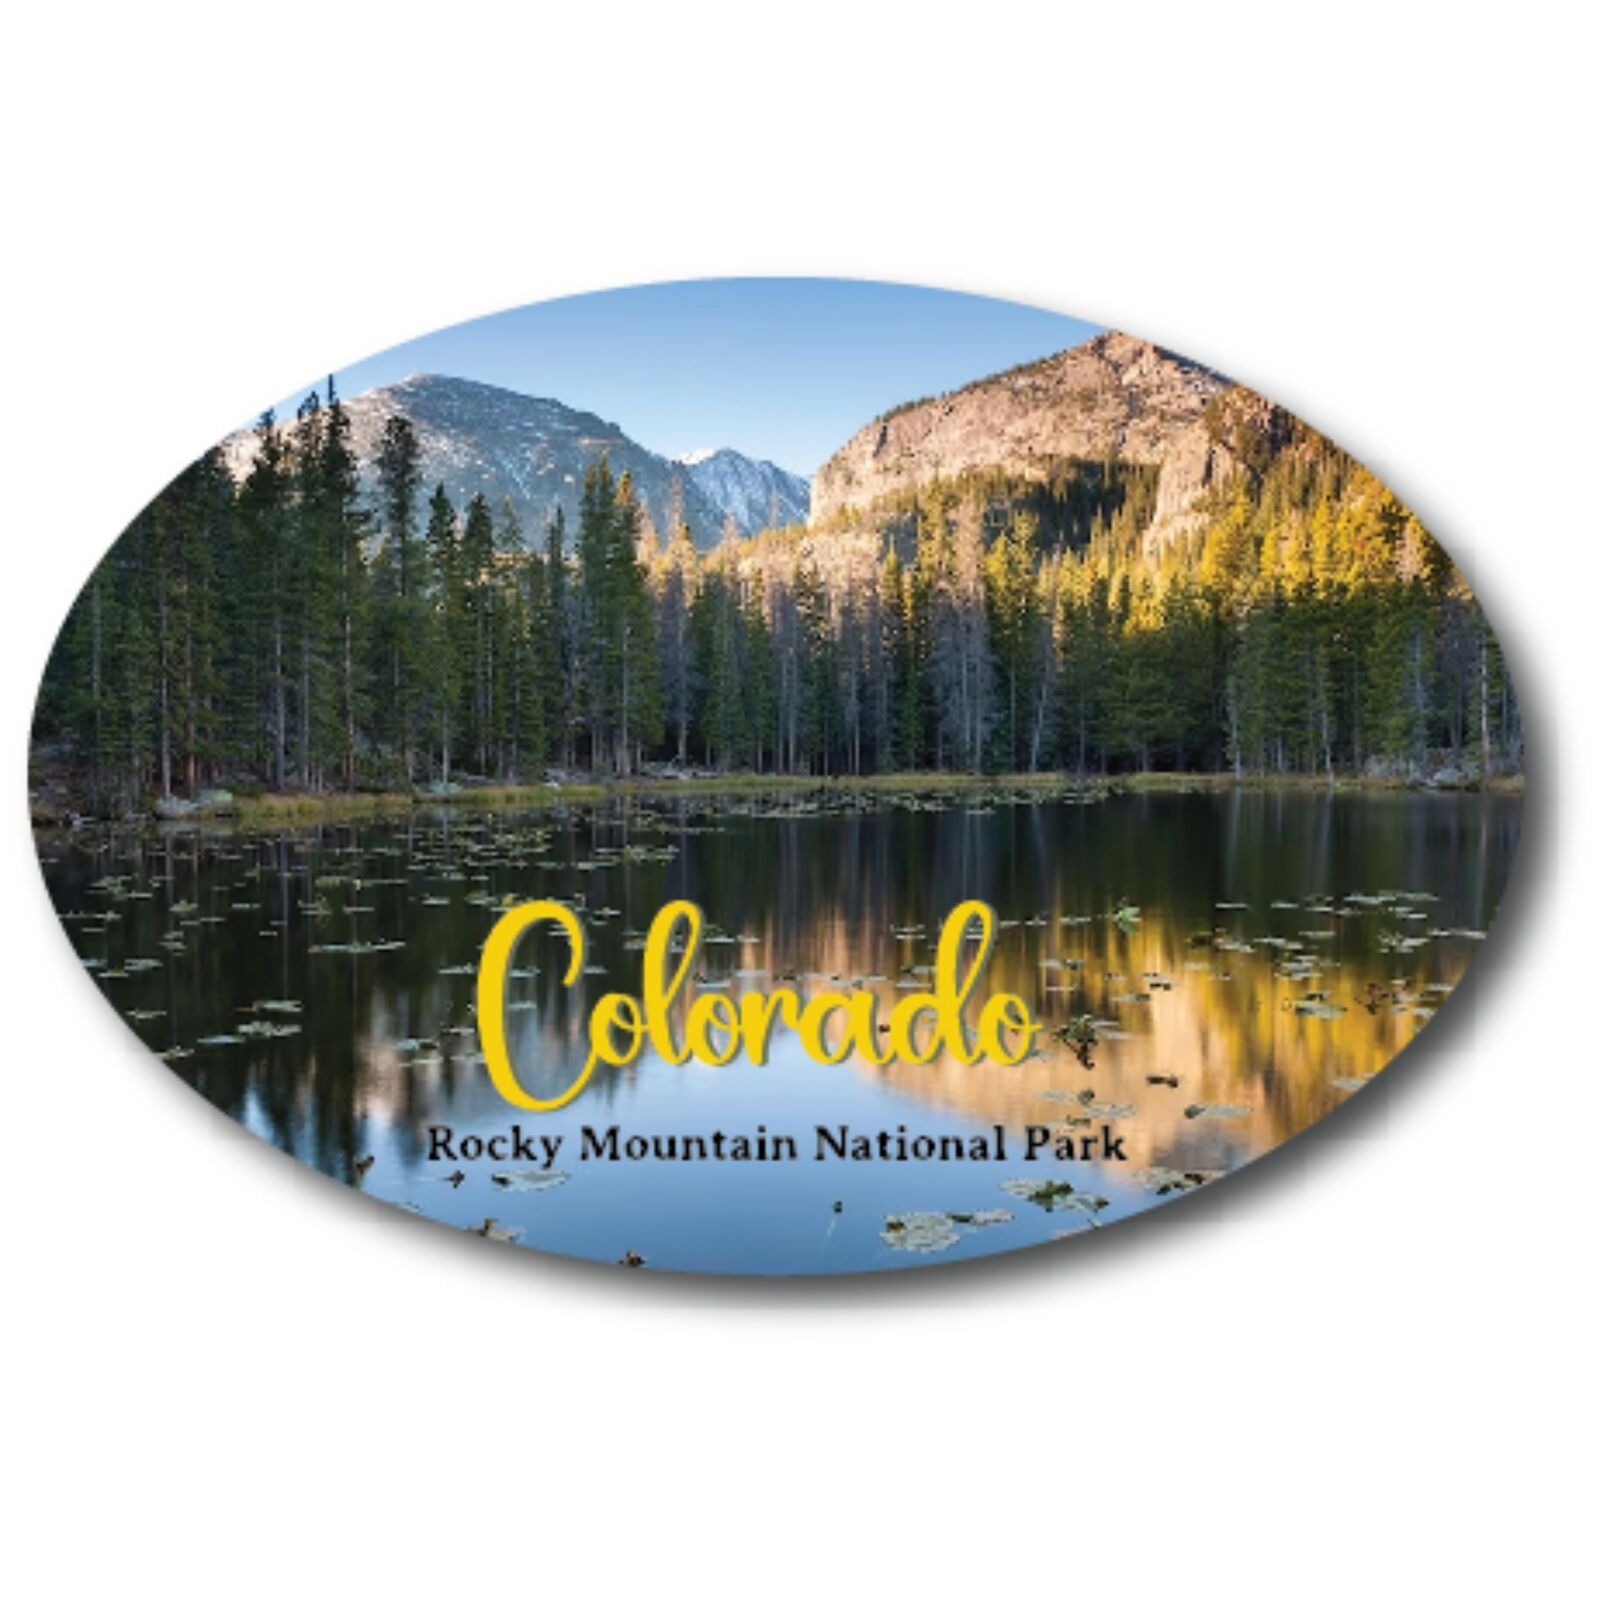 Magnet Me Up Colorado Rocky Mountain National Park Scenic Oval Magnet Decal, 4x6